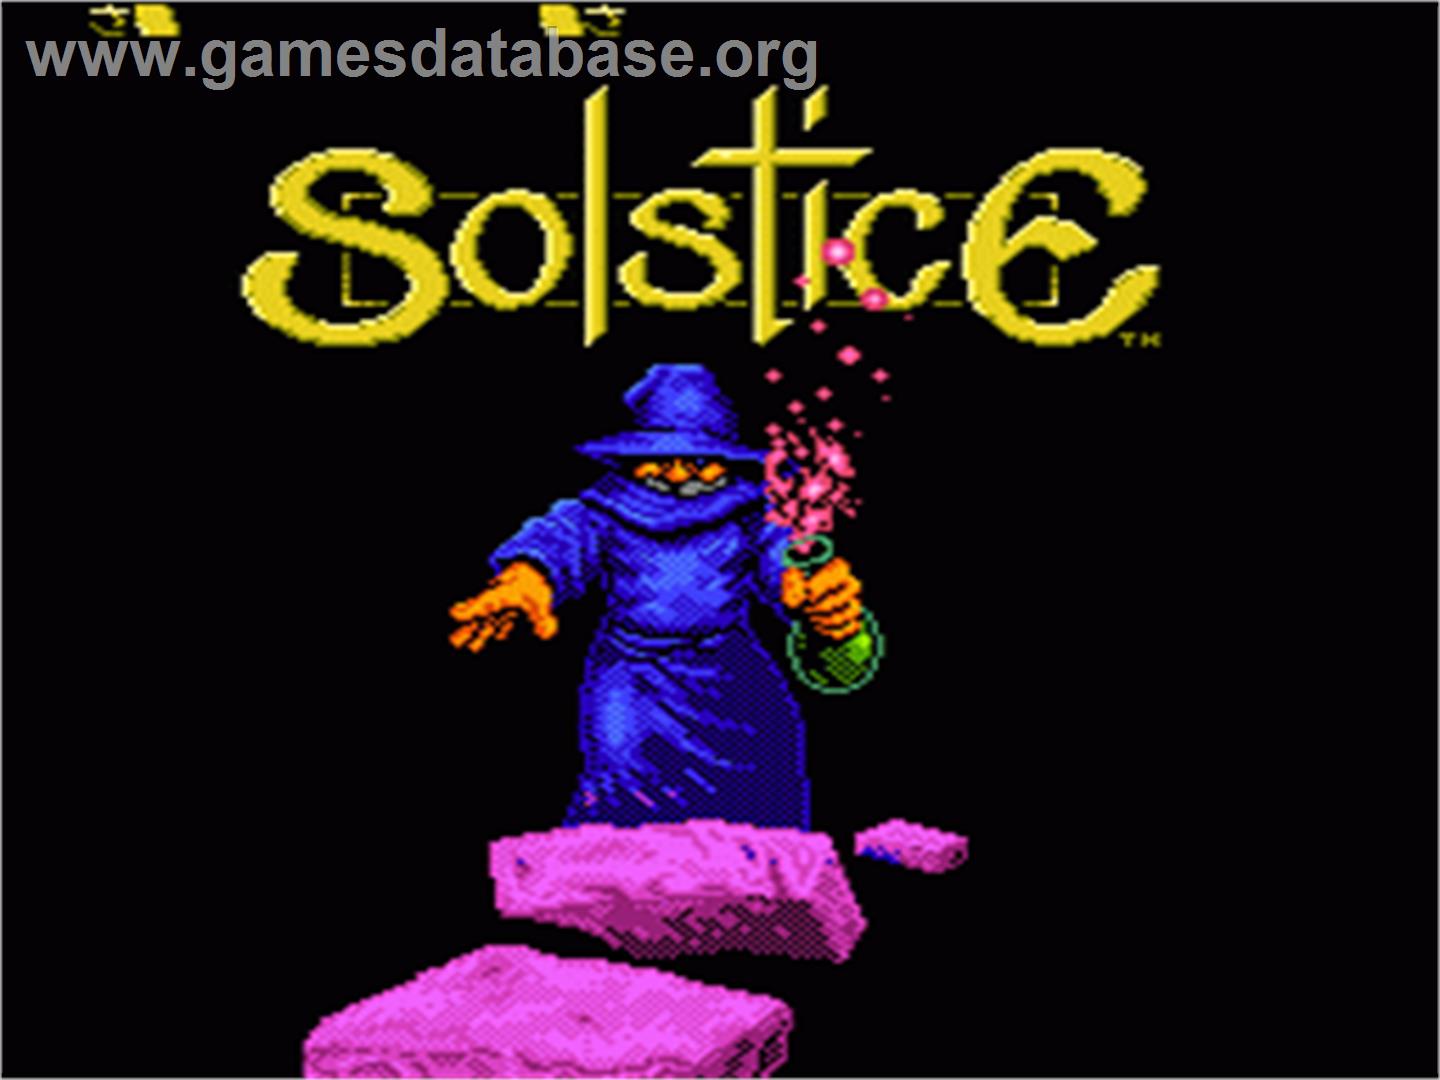 Solstice: The Quest for the Staff of Demnos - Nintendo NES - Artwork - Title Screen